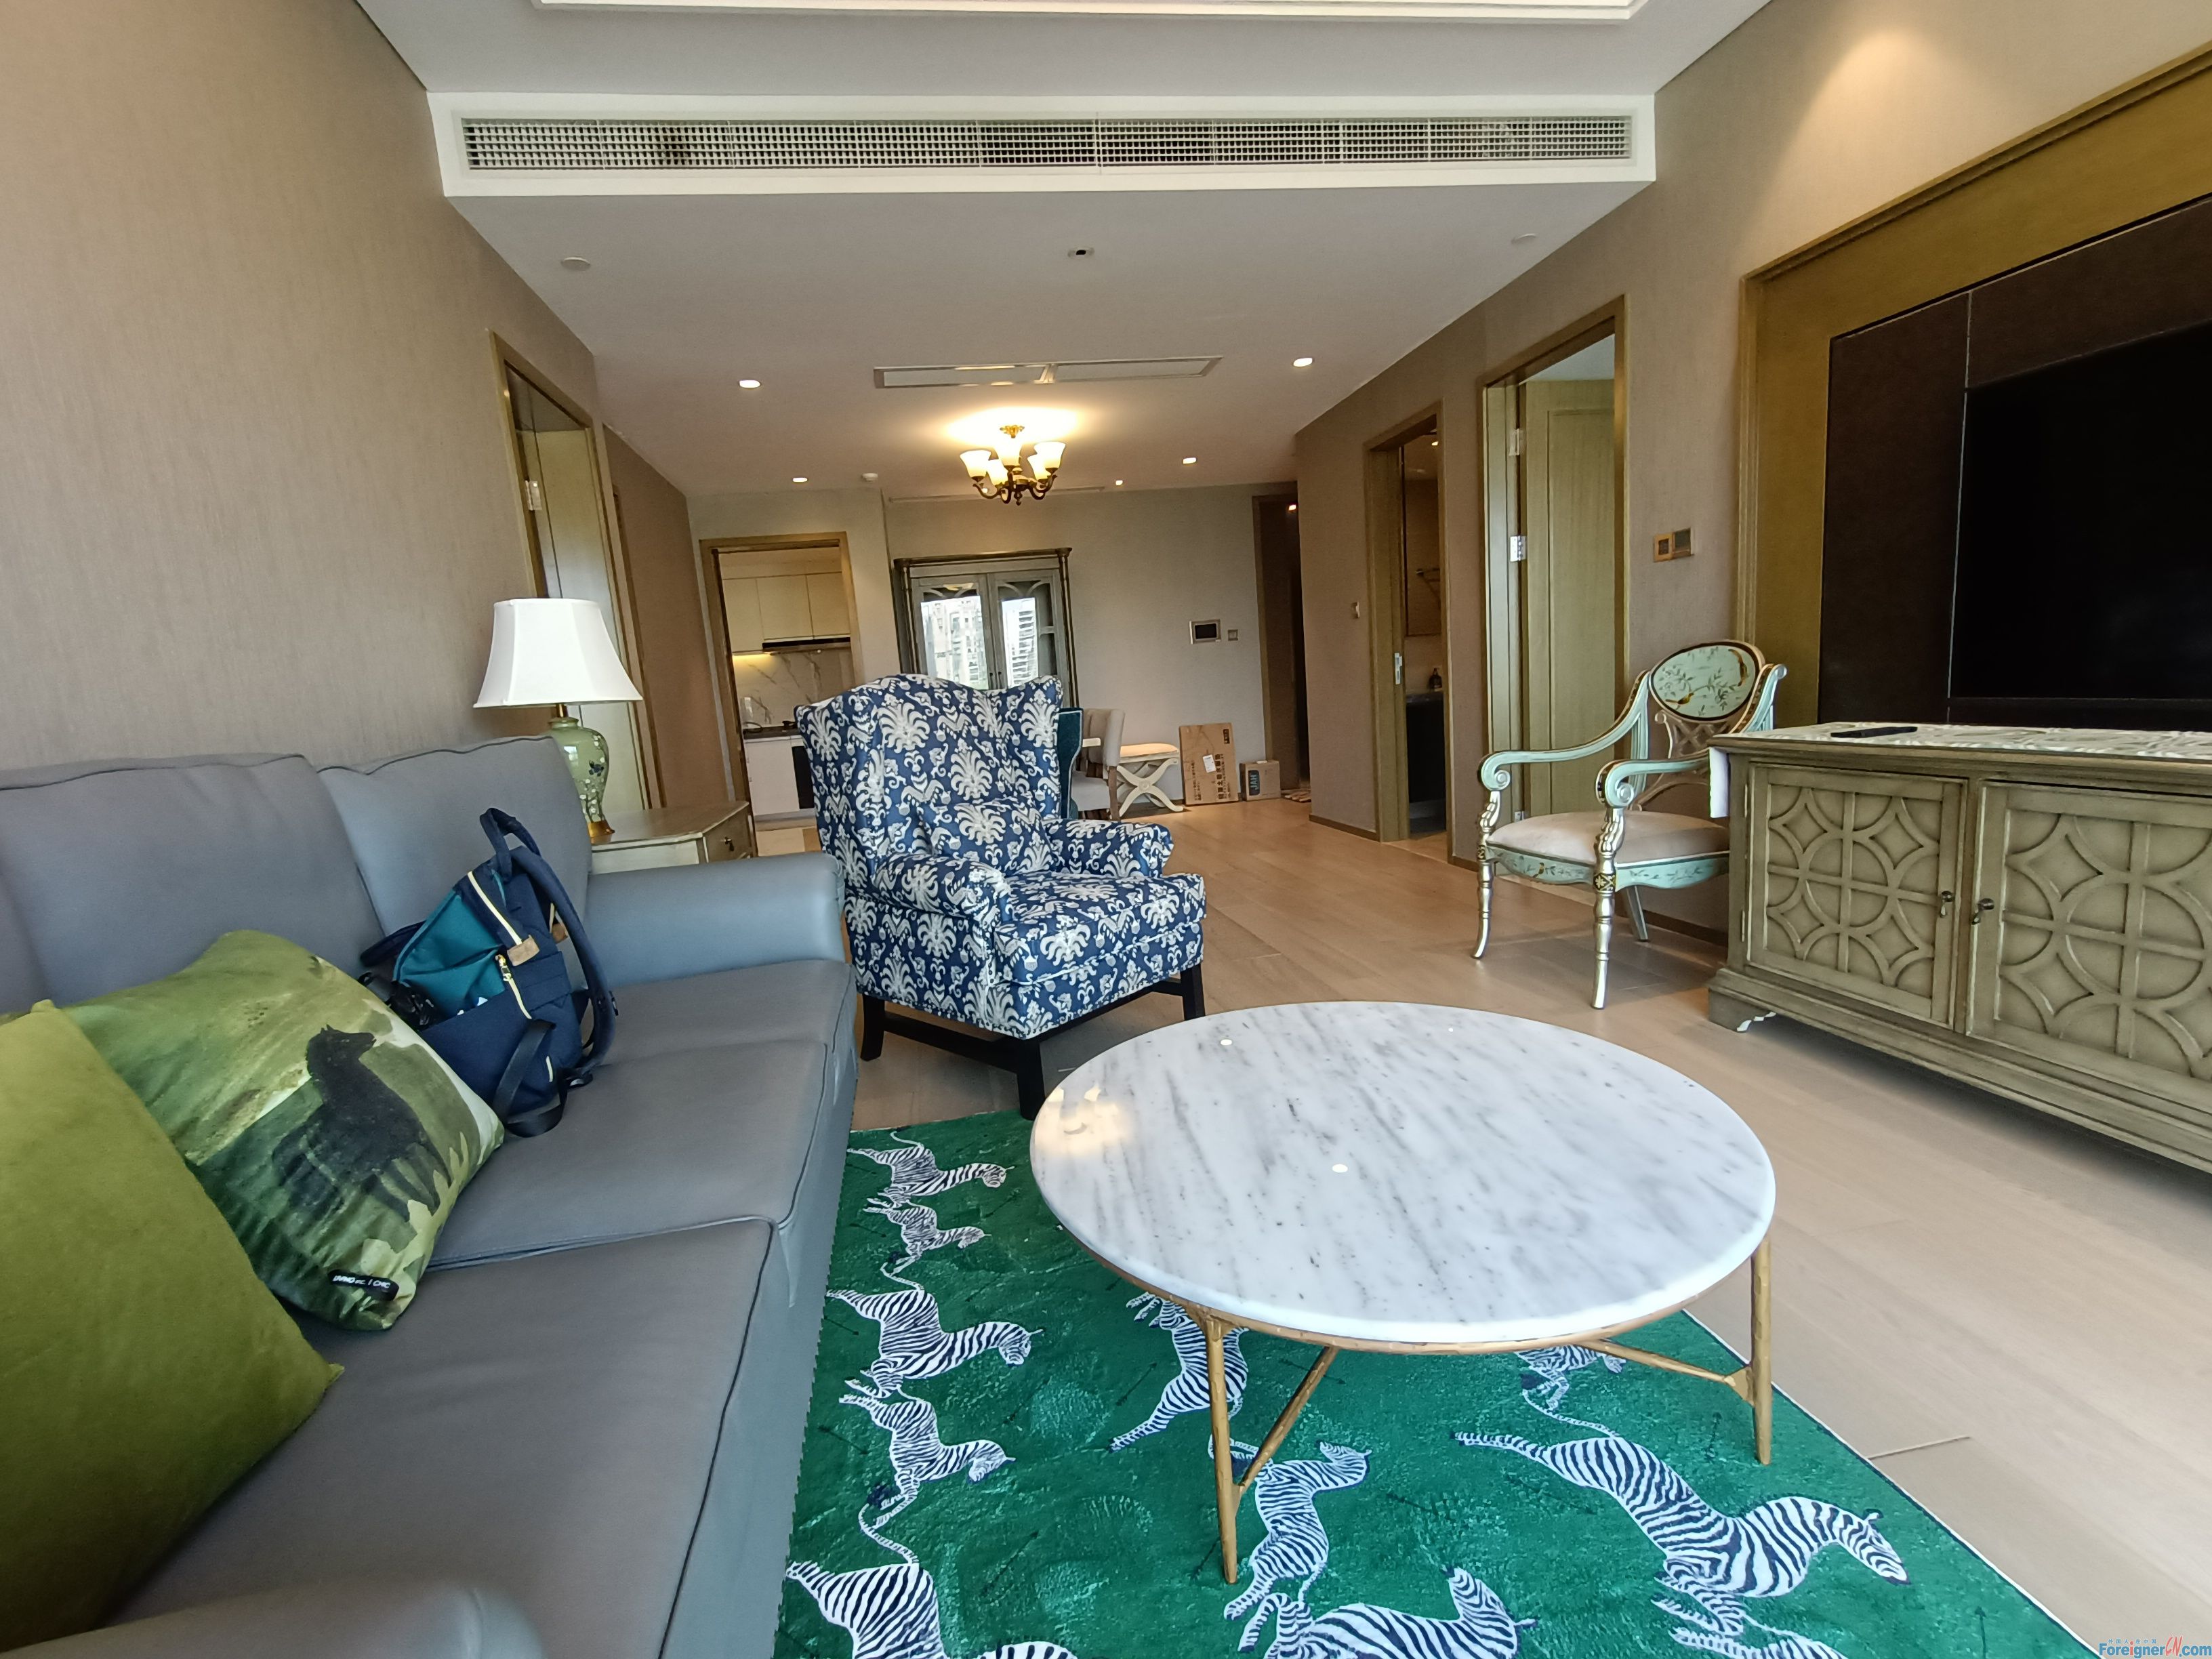 Fabulous!! HLCC Apartment/Living in Suzhou industrial Park /3bedrooms and 1 bedroom/Stunning furniture;Times Square /Moon habor and subway line1